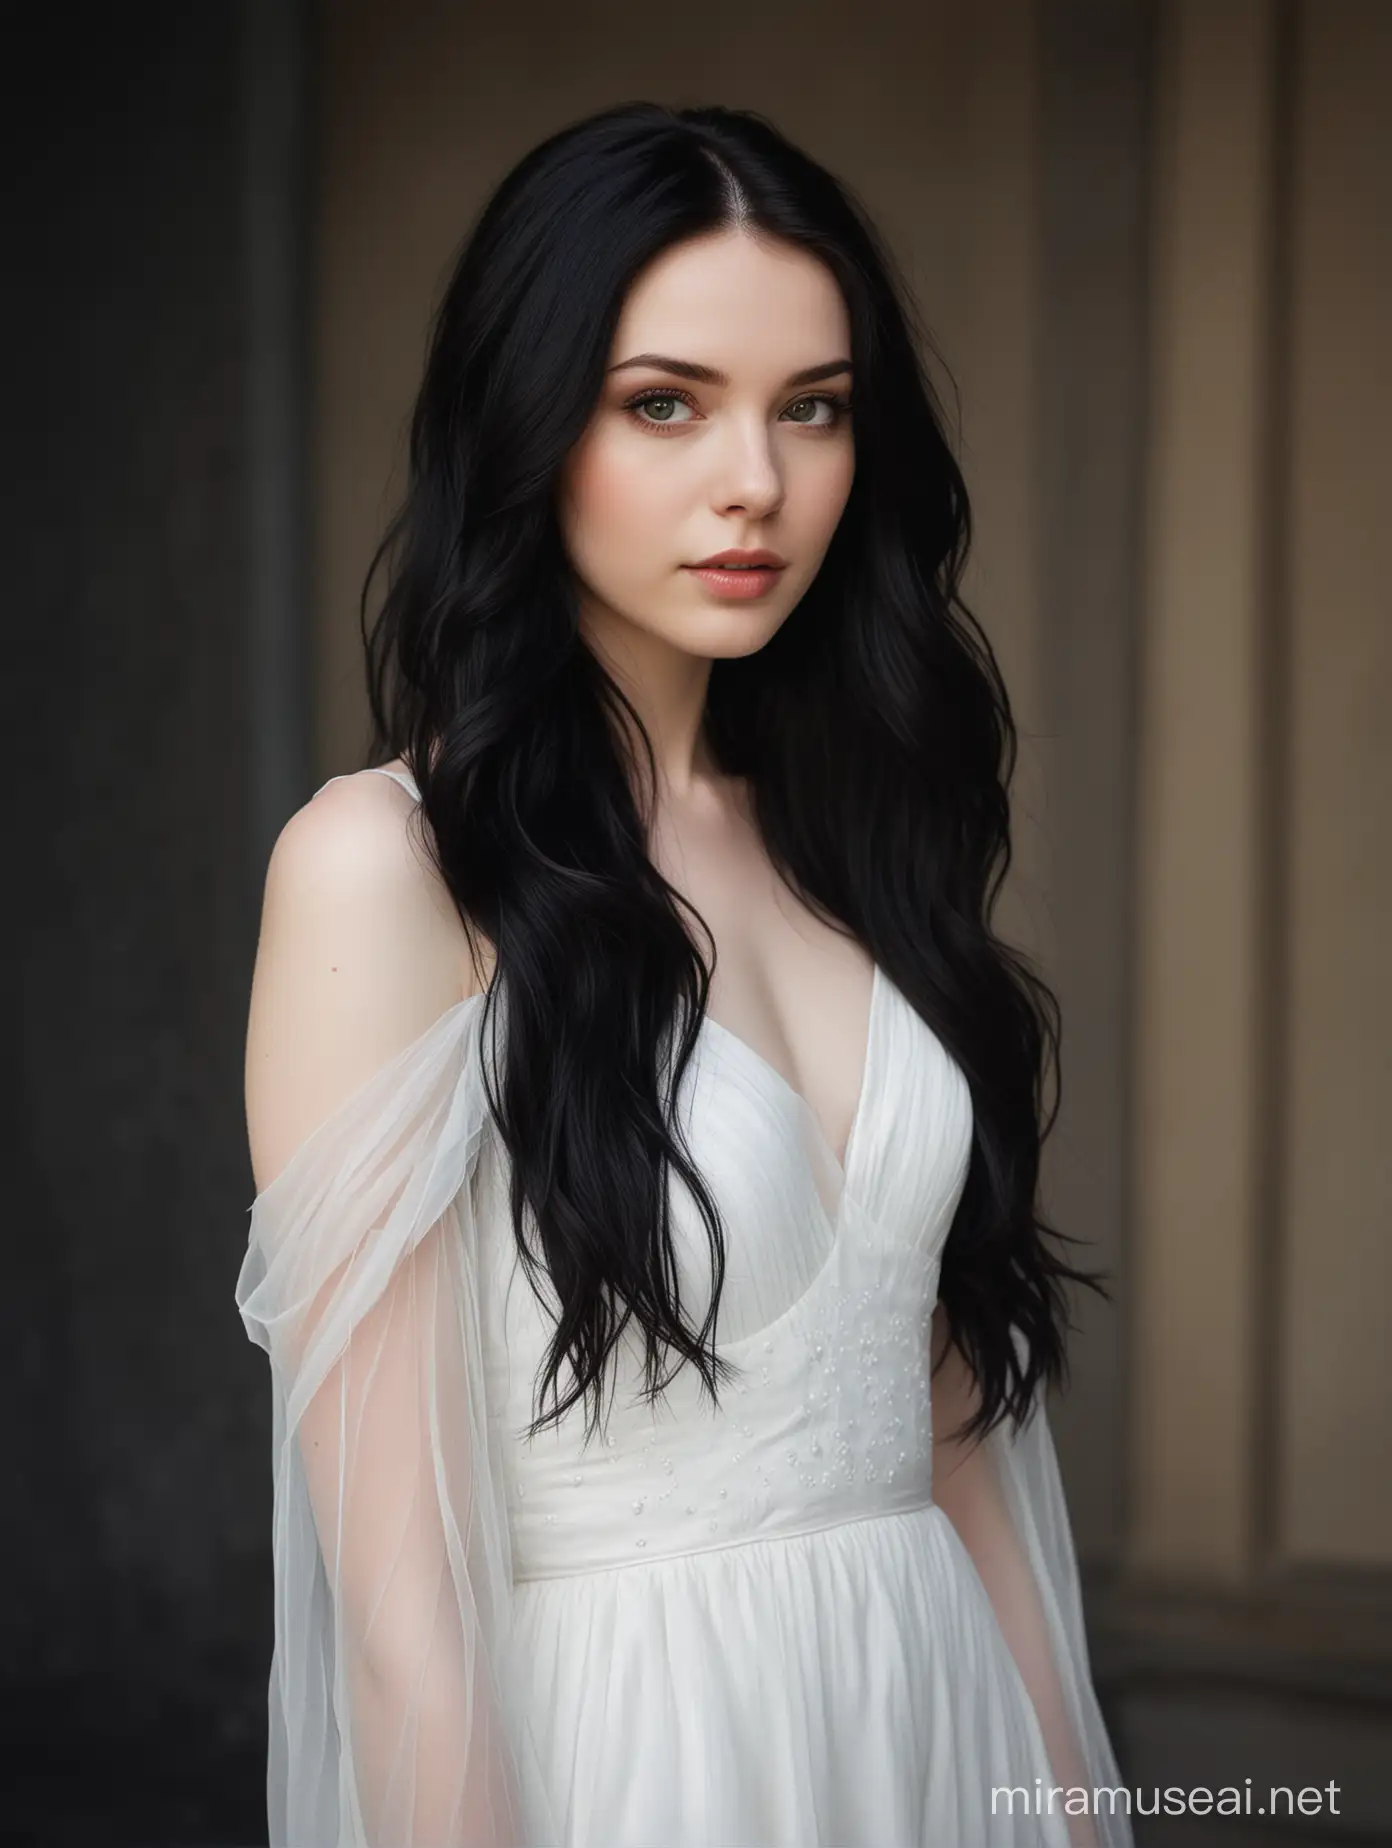 Ethereal Young Woman with Dark Hair in White Gown